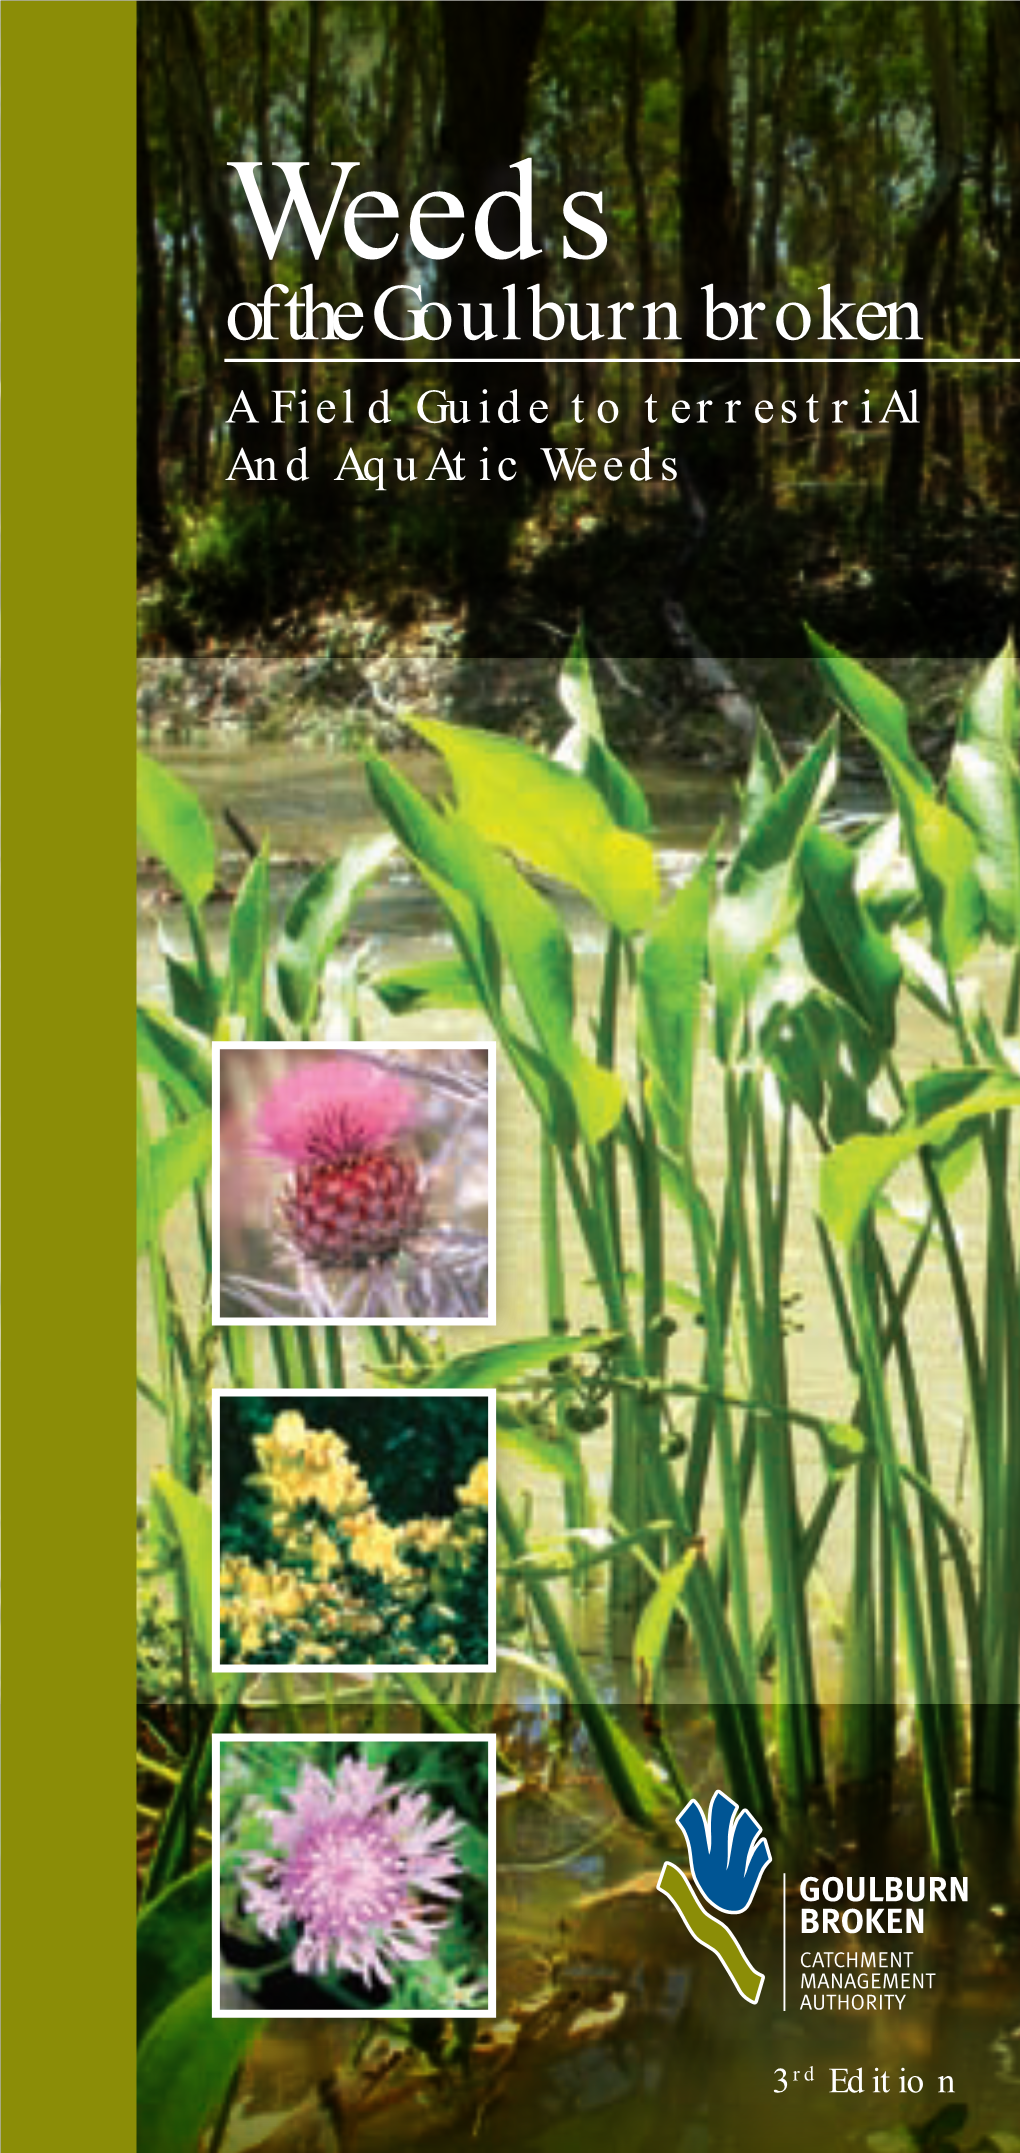 Weeds of the Goulburn Broken a Field Guide to T E R R E S T R I a L and Aquatic Weeds